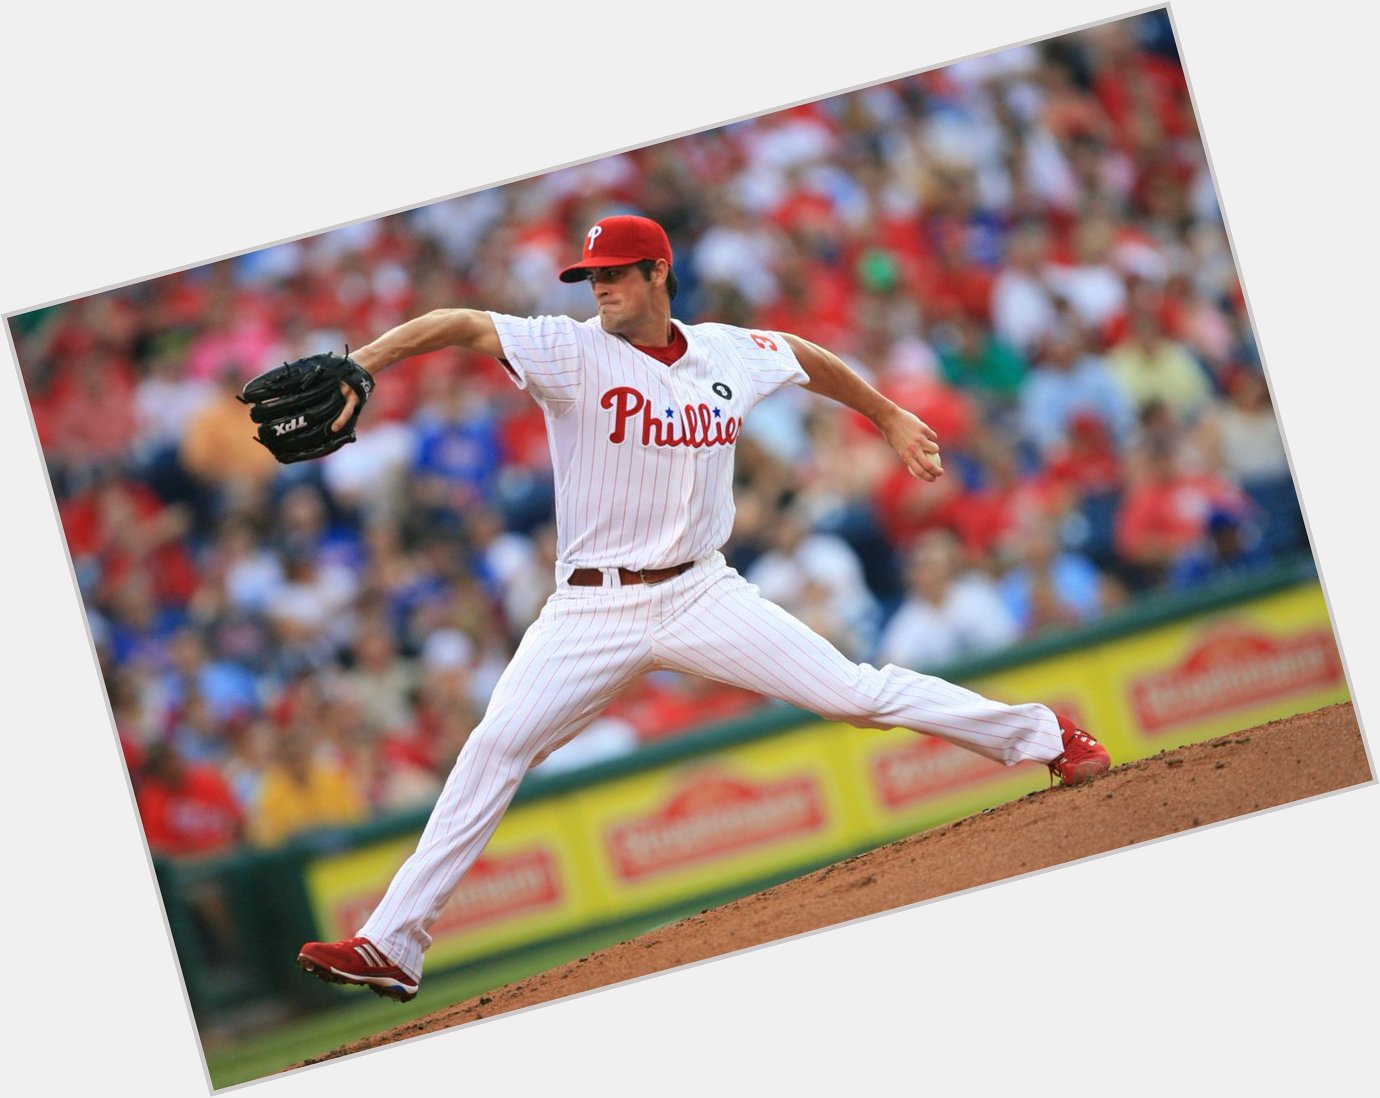 Happy Birthday to Cole Hamels, who turns 31 today! 